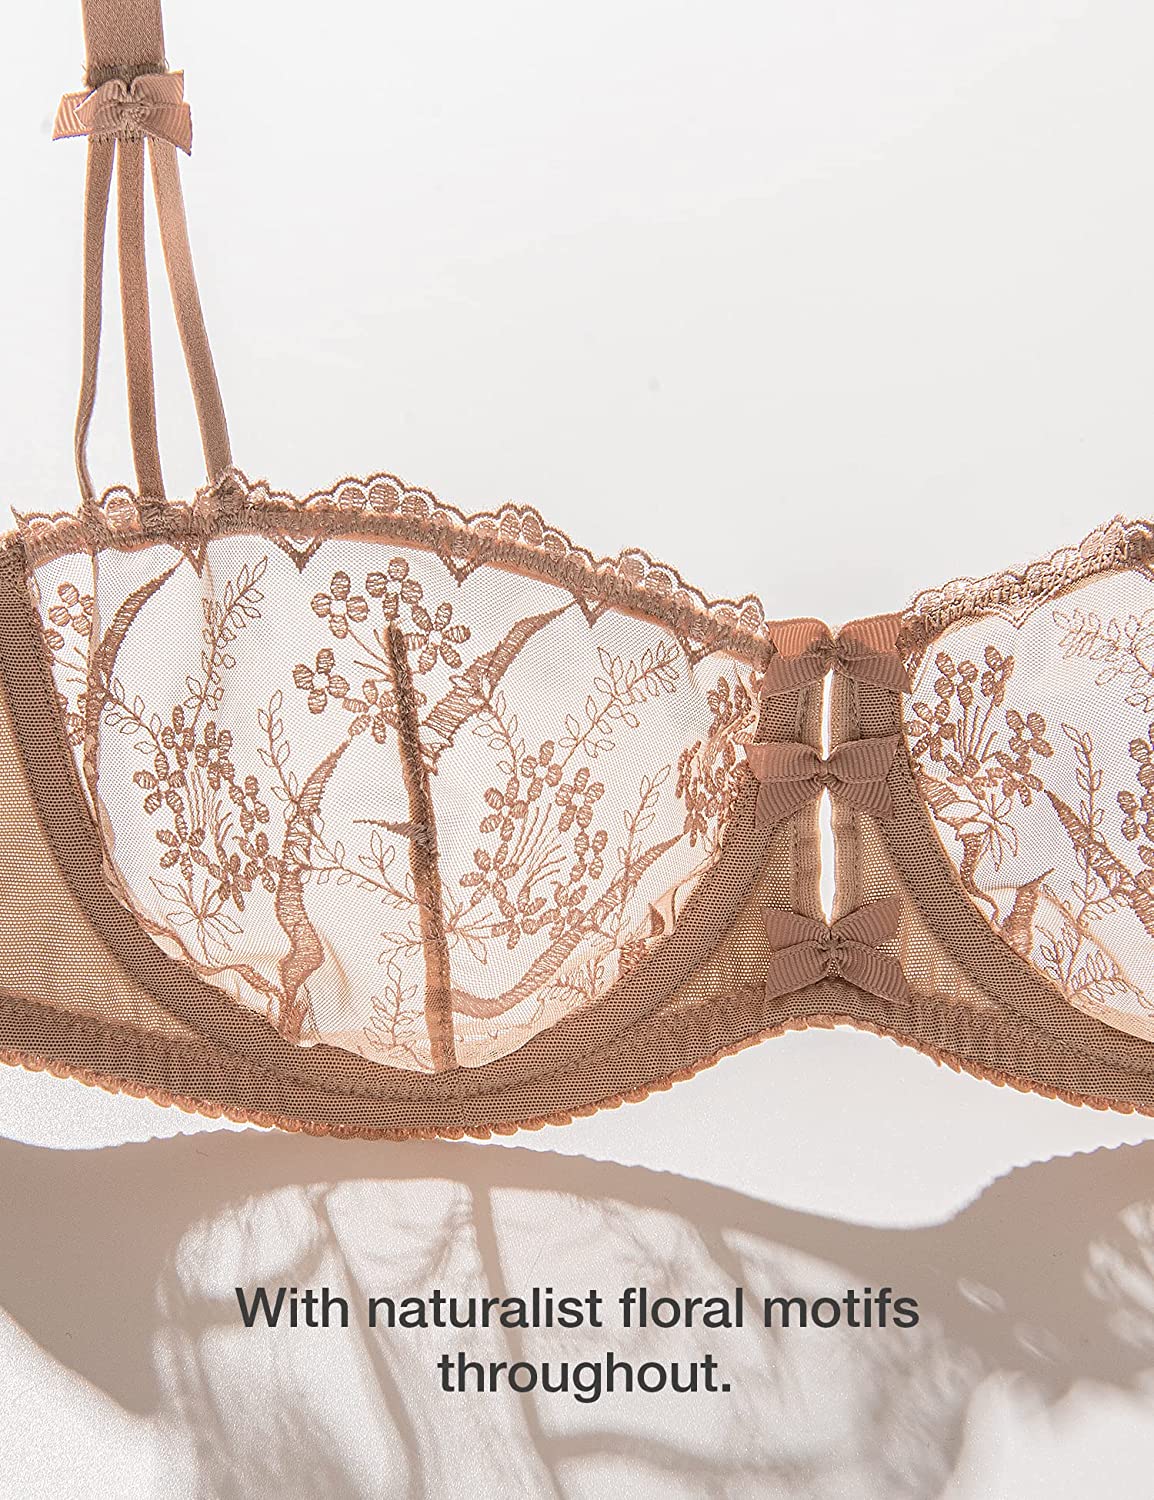 Sheer Bralette See Through Lingerie Embroidery Lingerie Floral